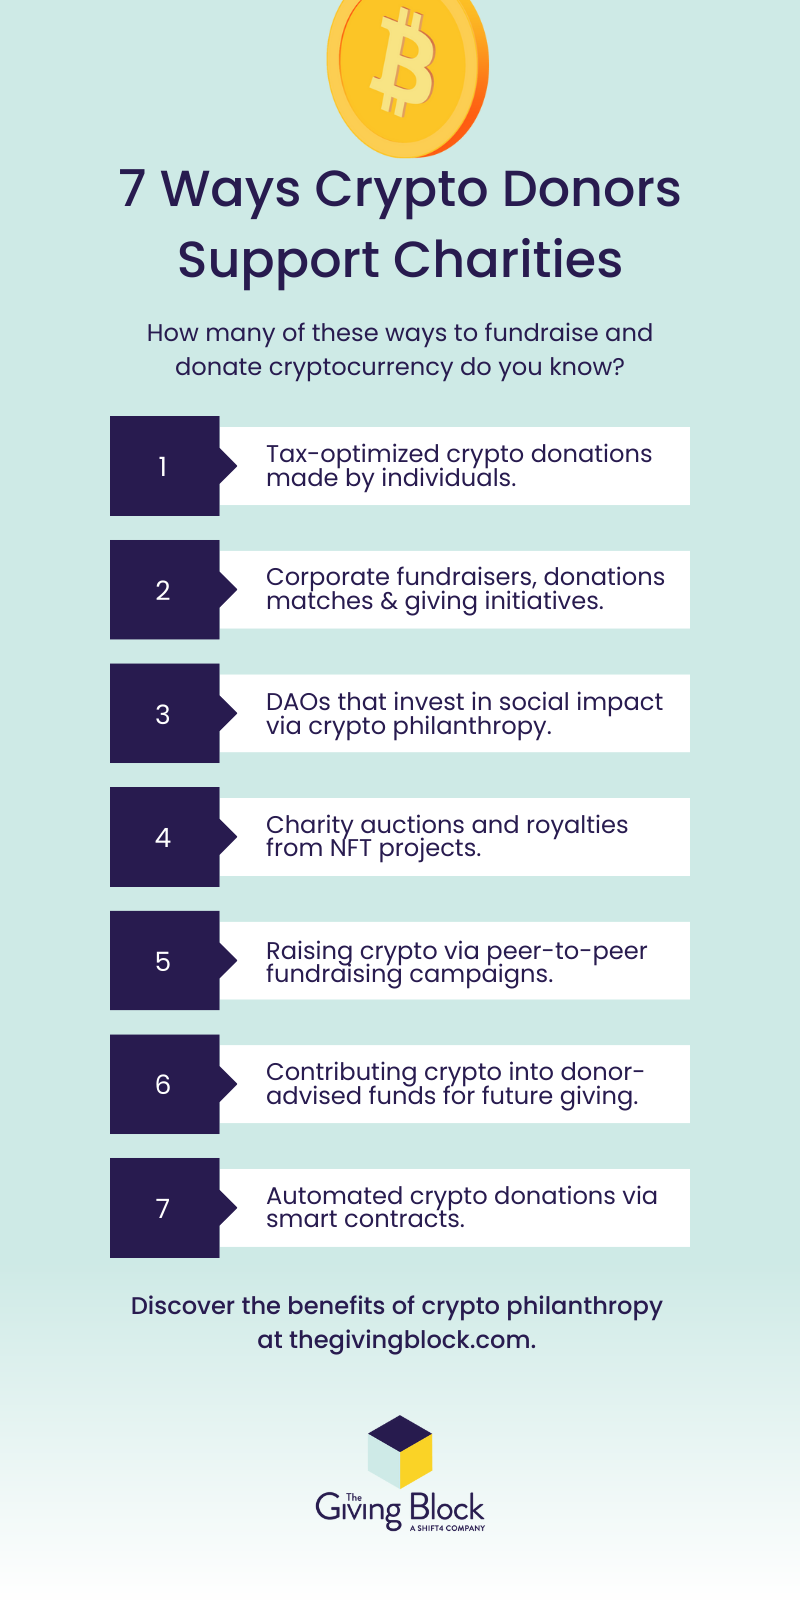 7 Ways Crypto Donors Support Charities - INFOGRAPHIC | The Giving Block